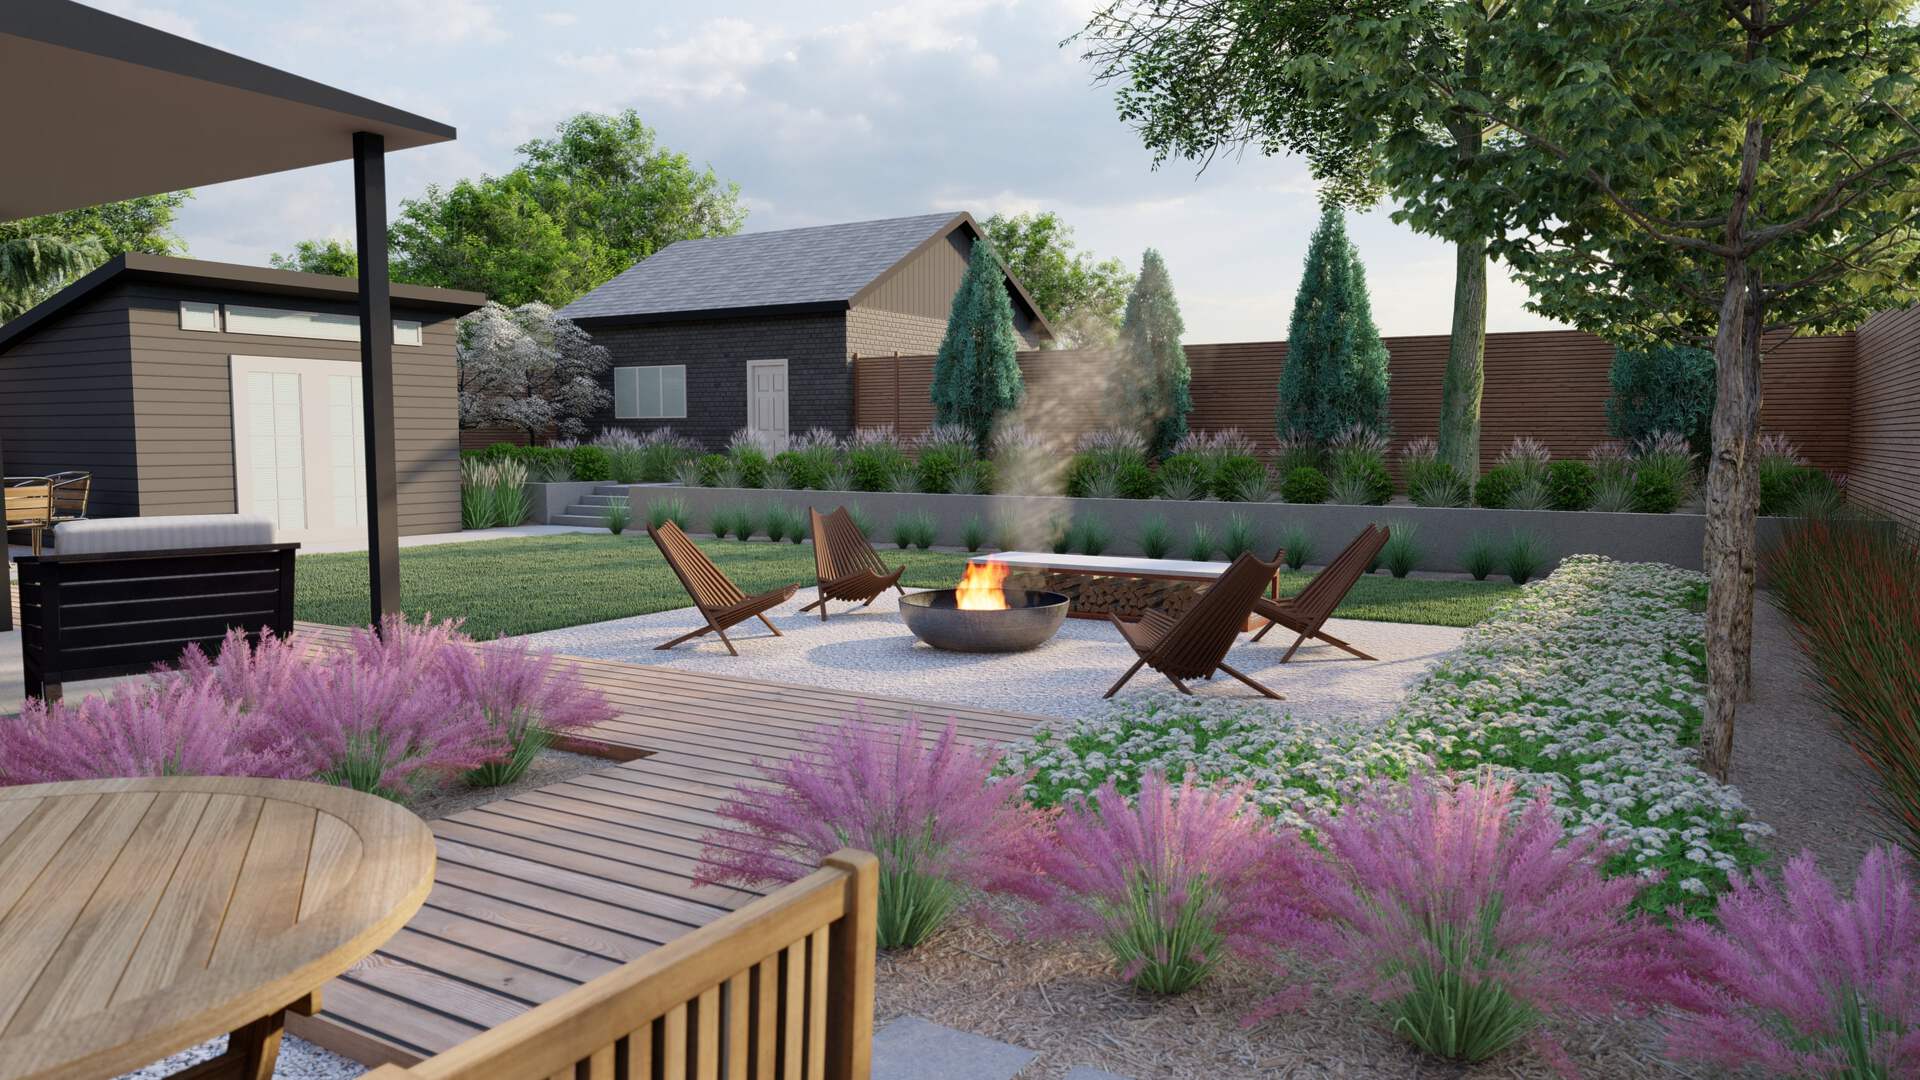 a backyard landscaping idea with a fire pit off a wood deck with a pergola. Concrete garden walls around the edge of the property with flowers